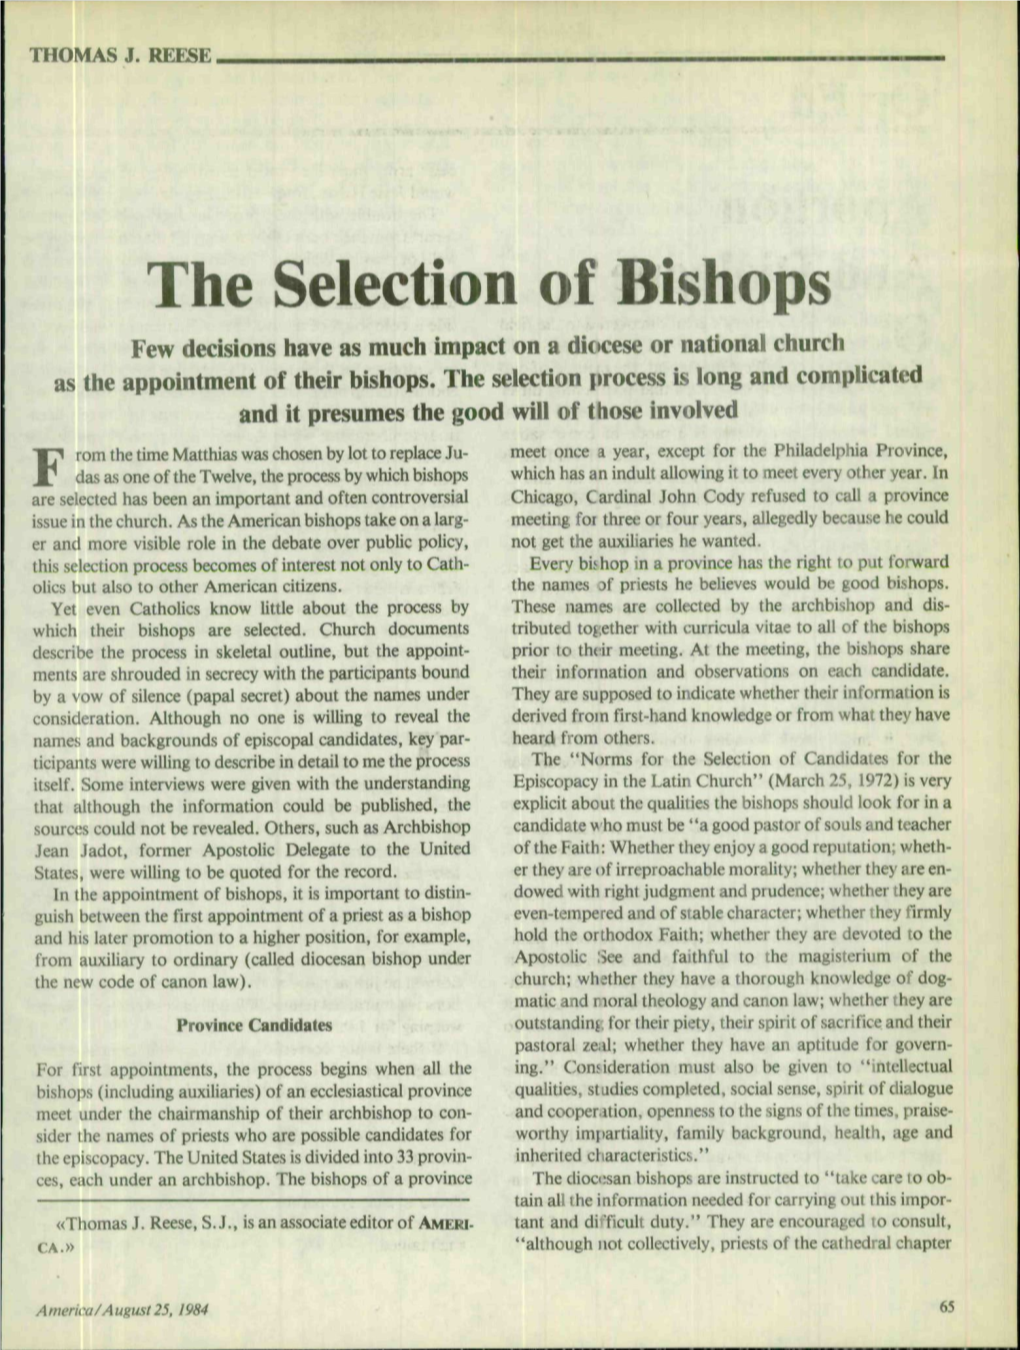 The Selection of Bishops Few Decisions Have As Much Impact on a Diocese Or National Church As the Appointment of Their Bishops